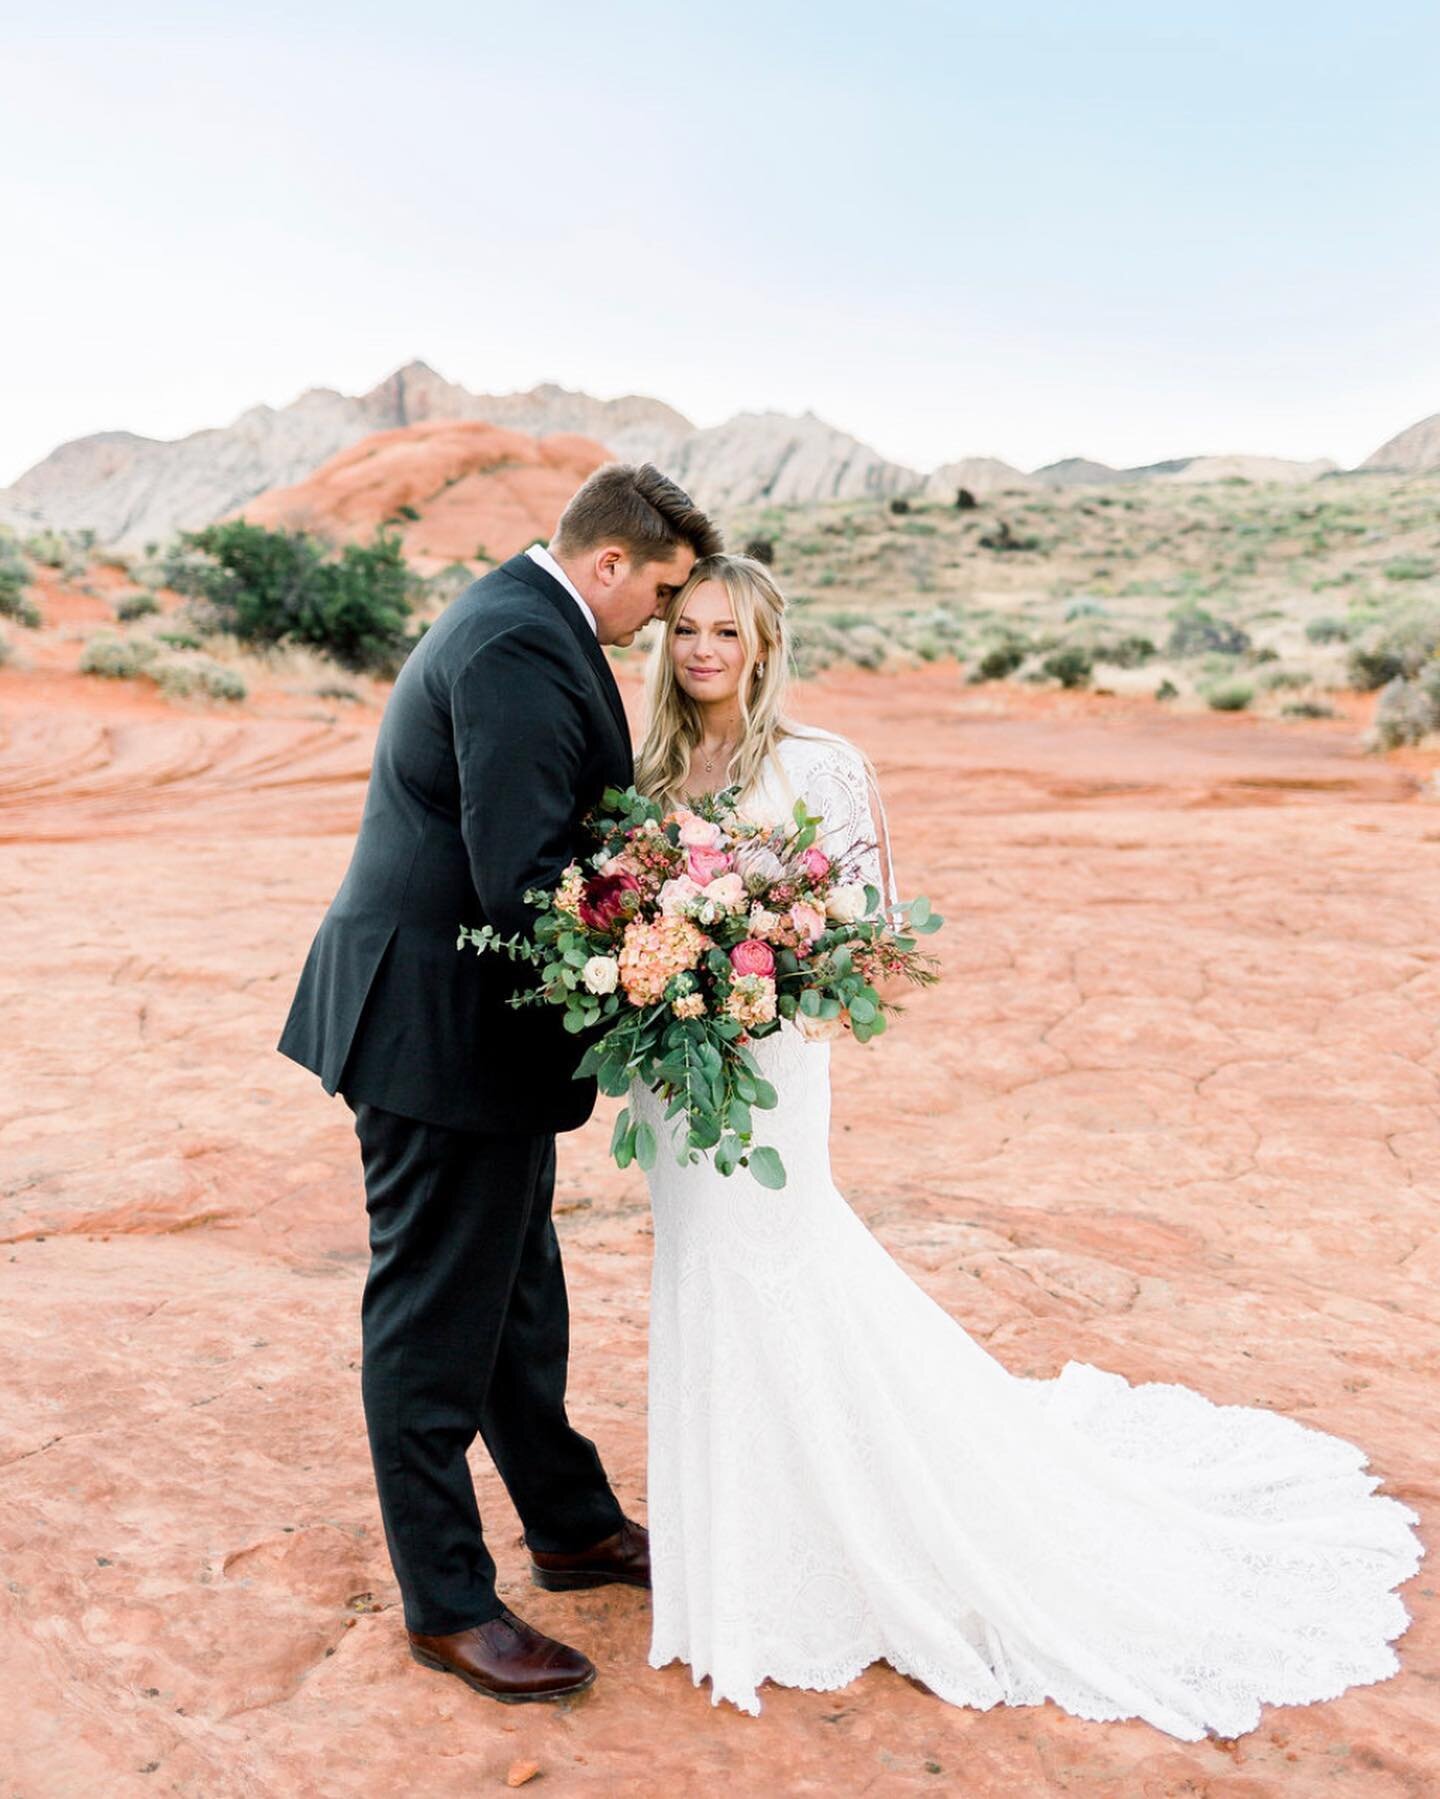 When 2 years feels like it was yesterday! These two celebrated their second anniversary and we are just as in love with their Bridals as we were then! 

#engagement #anniversary #2years #couple #goals #together #love #celebrate #beautiful #redrocks #